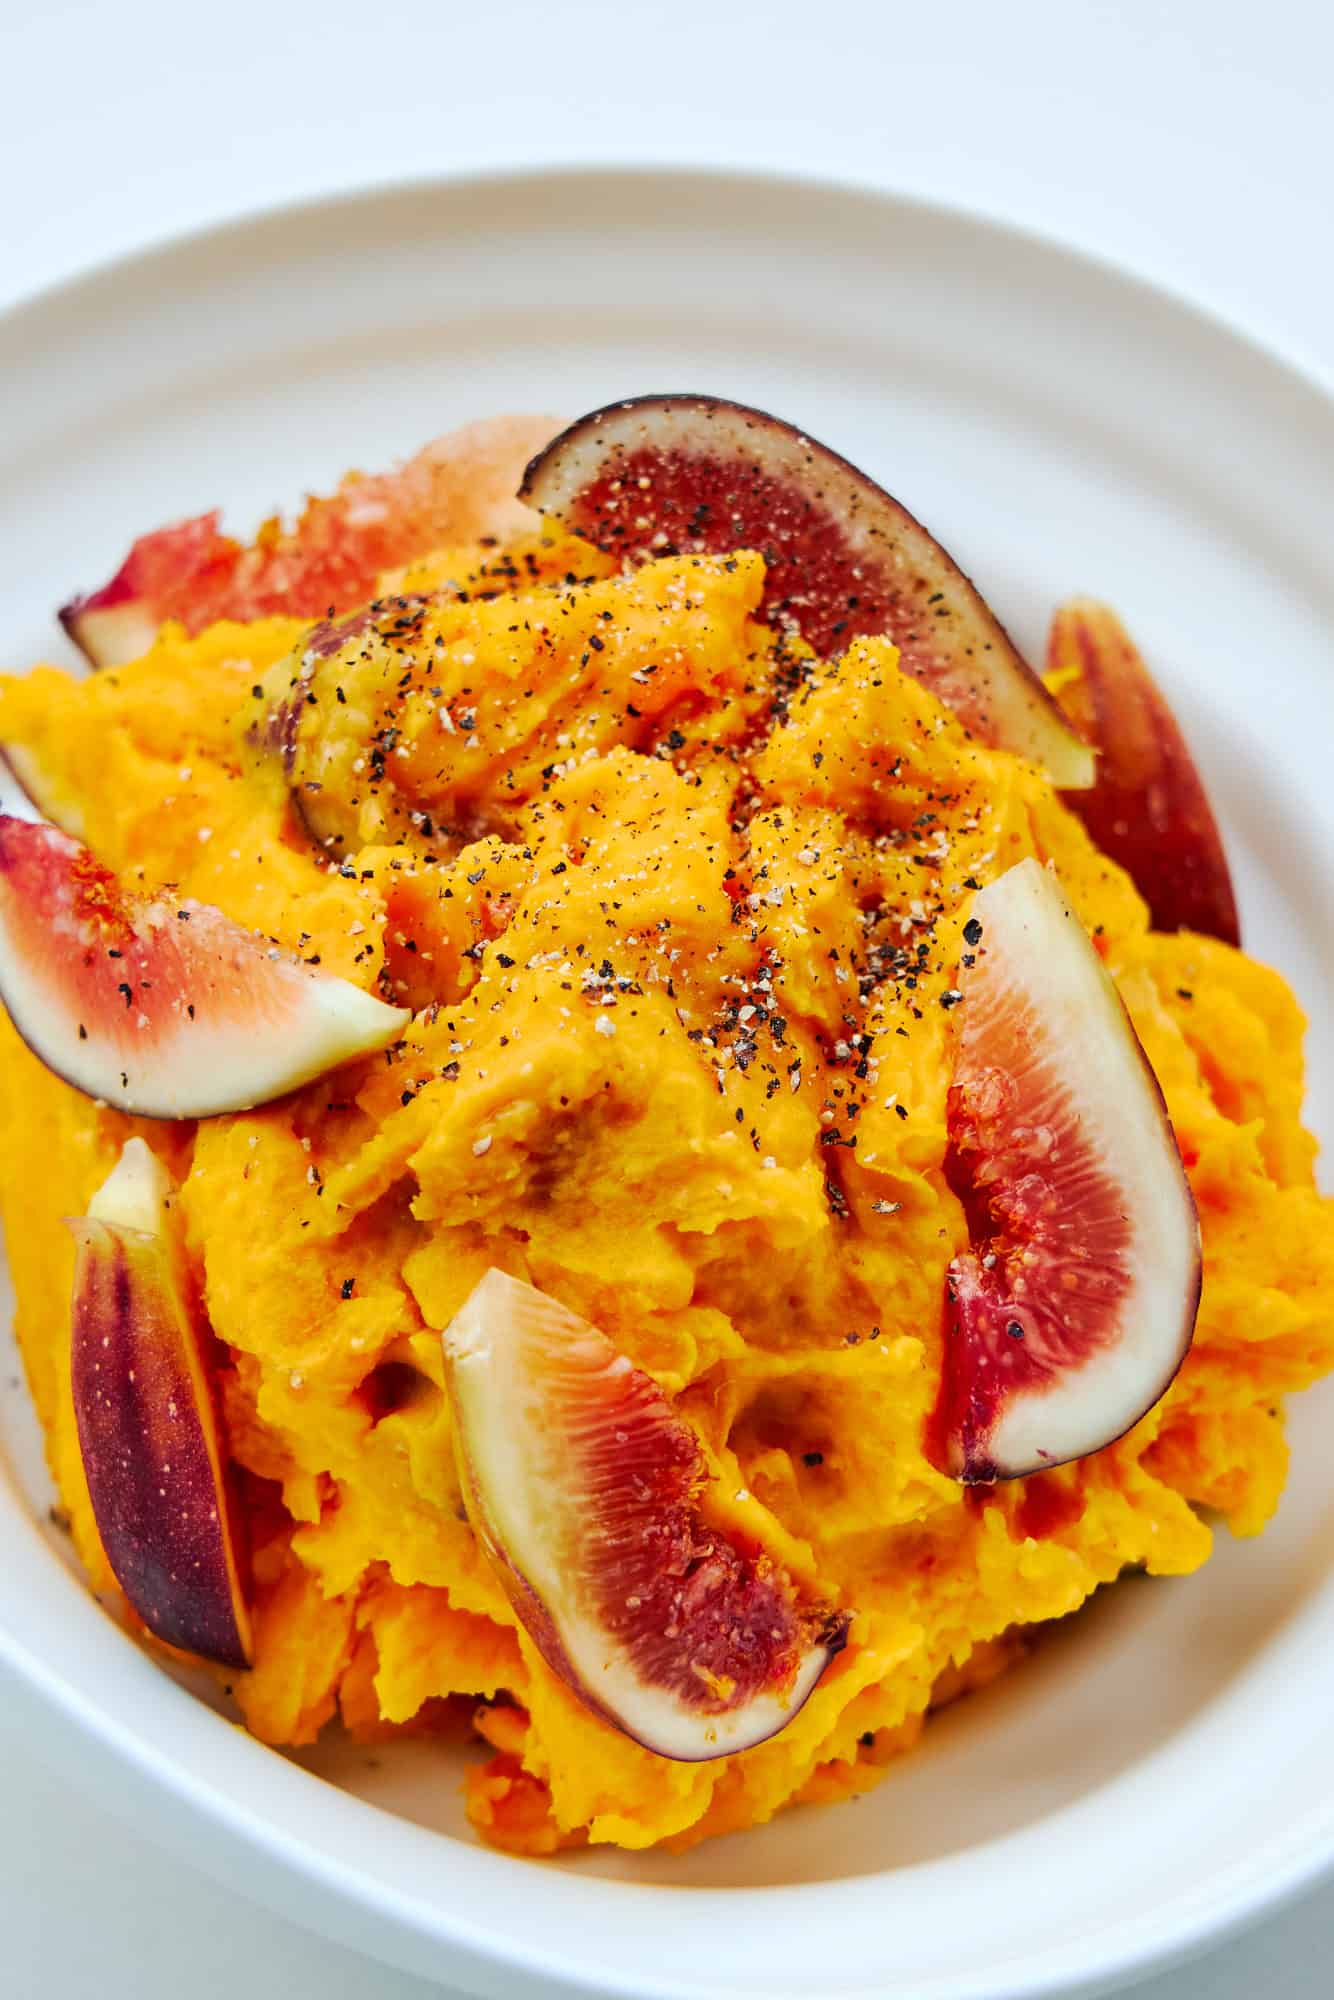 Delicious autumn salad made with kabocha and figs mixed with cream cheese and nutty miso.